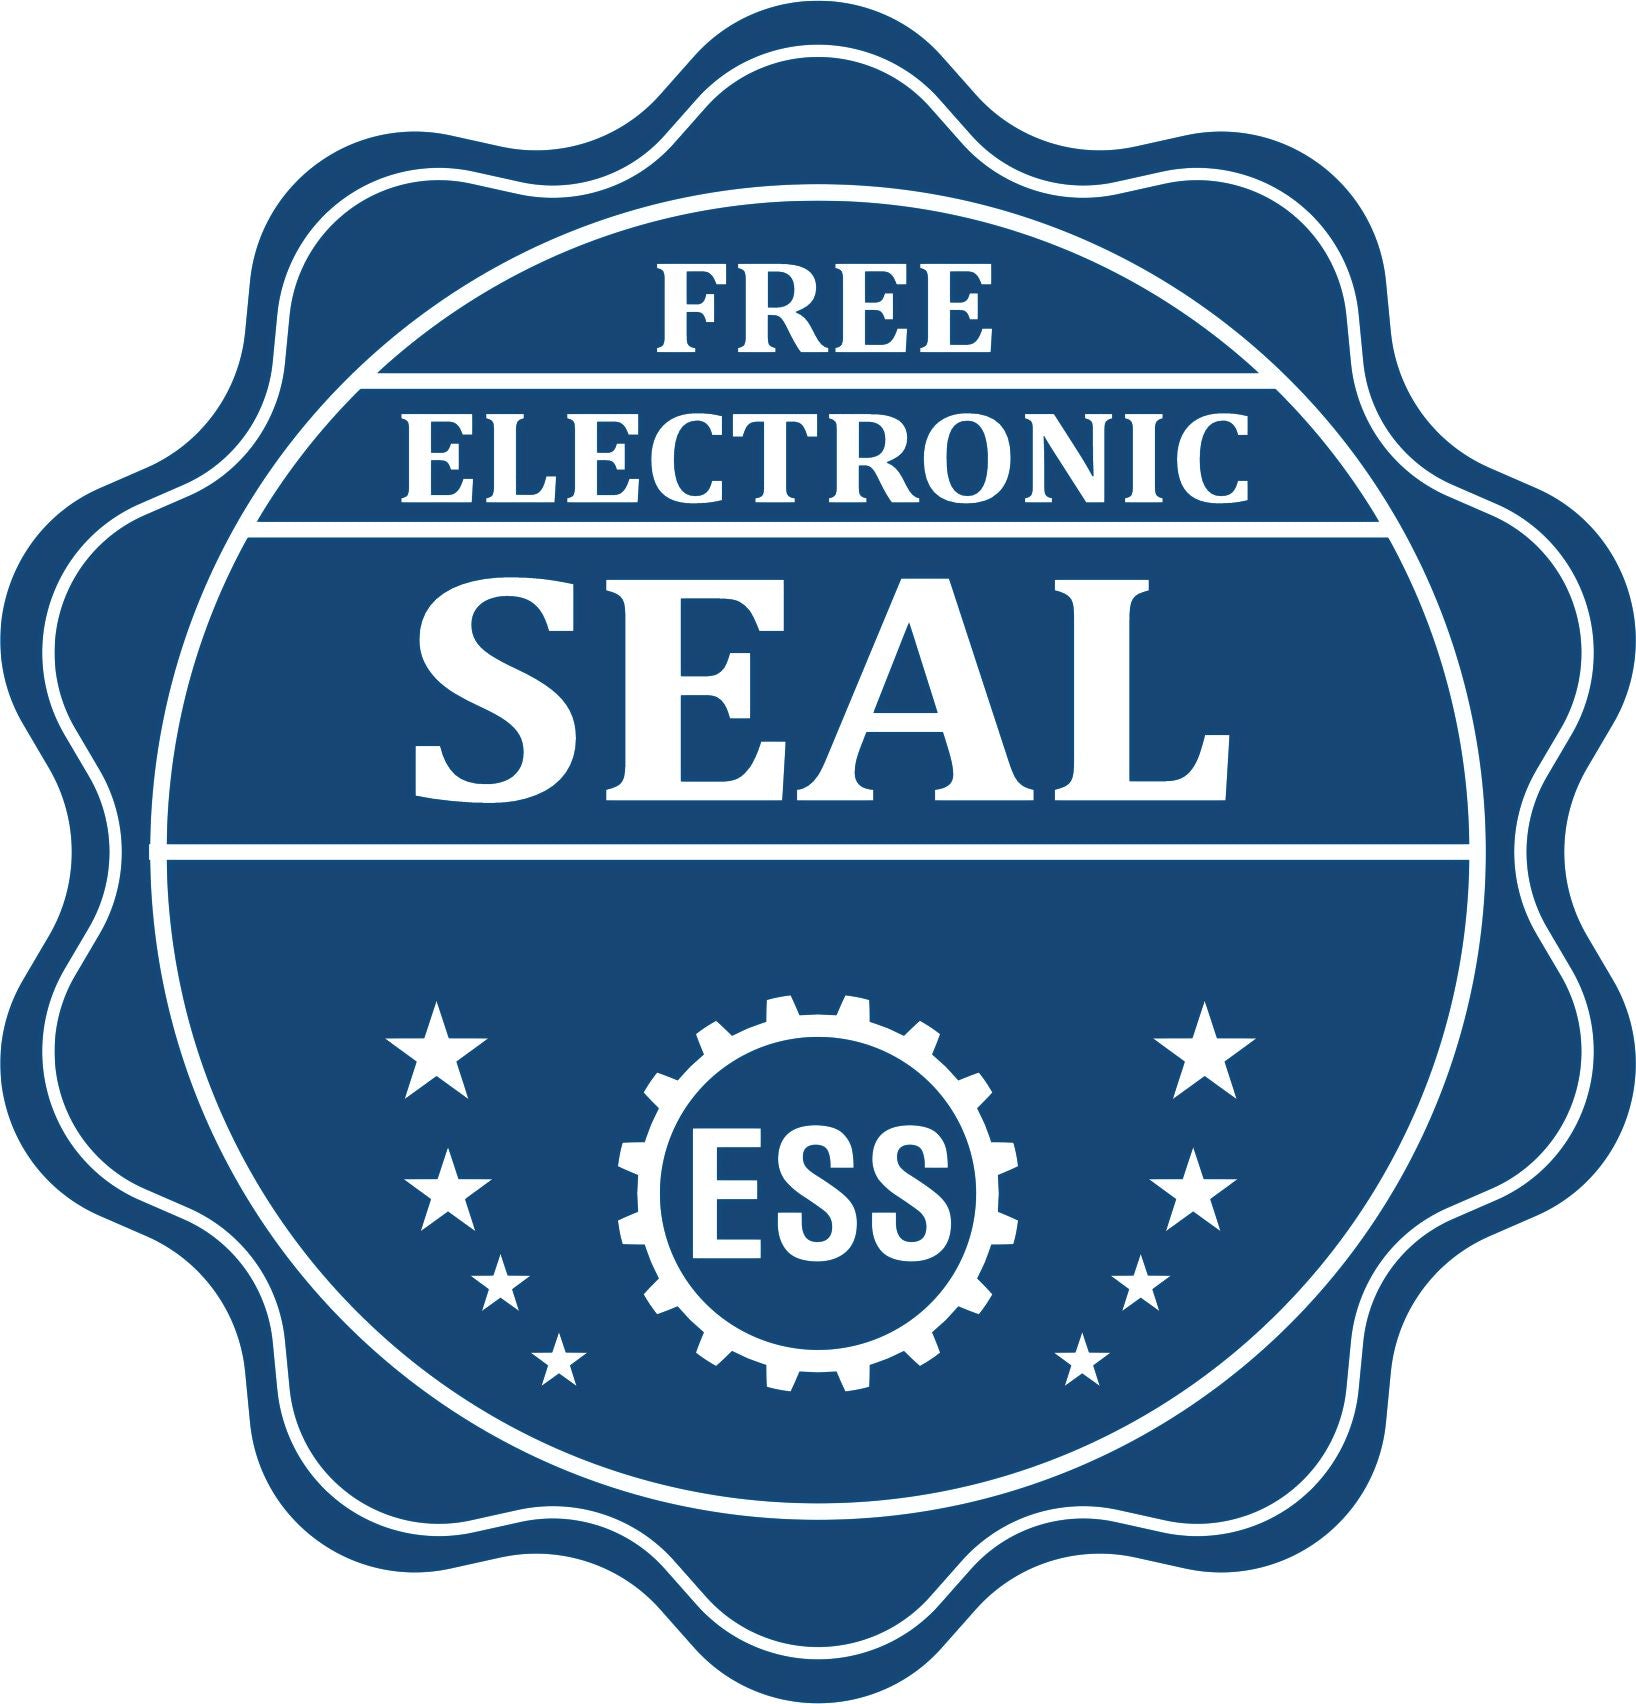 A badge showing a free electronic seal for the Gift New York Land Surveyor Seal with stars and the ESS gear on the emblem.